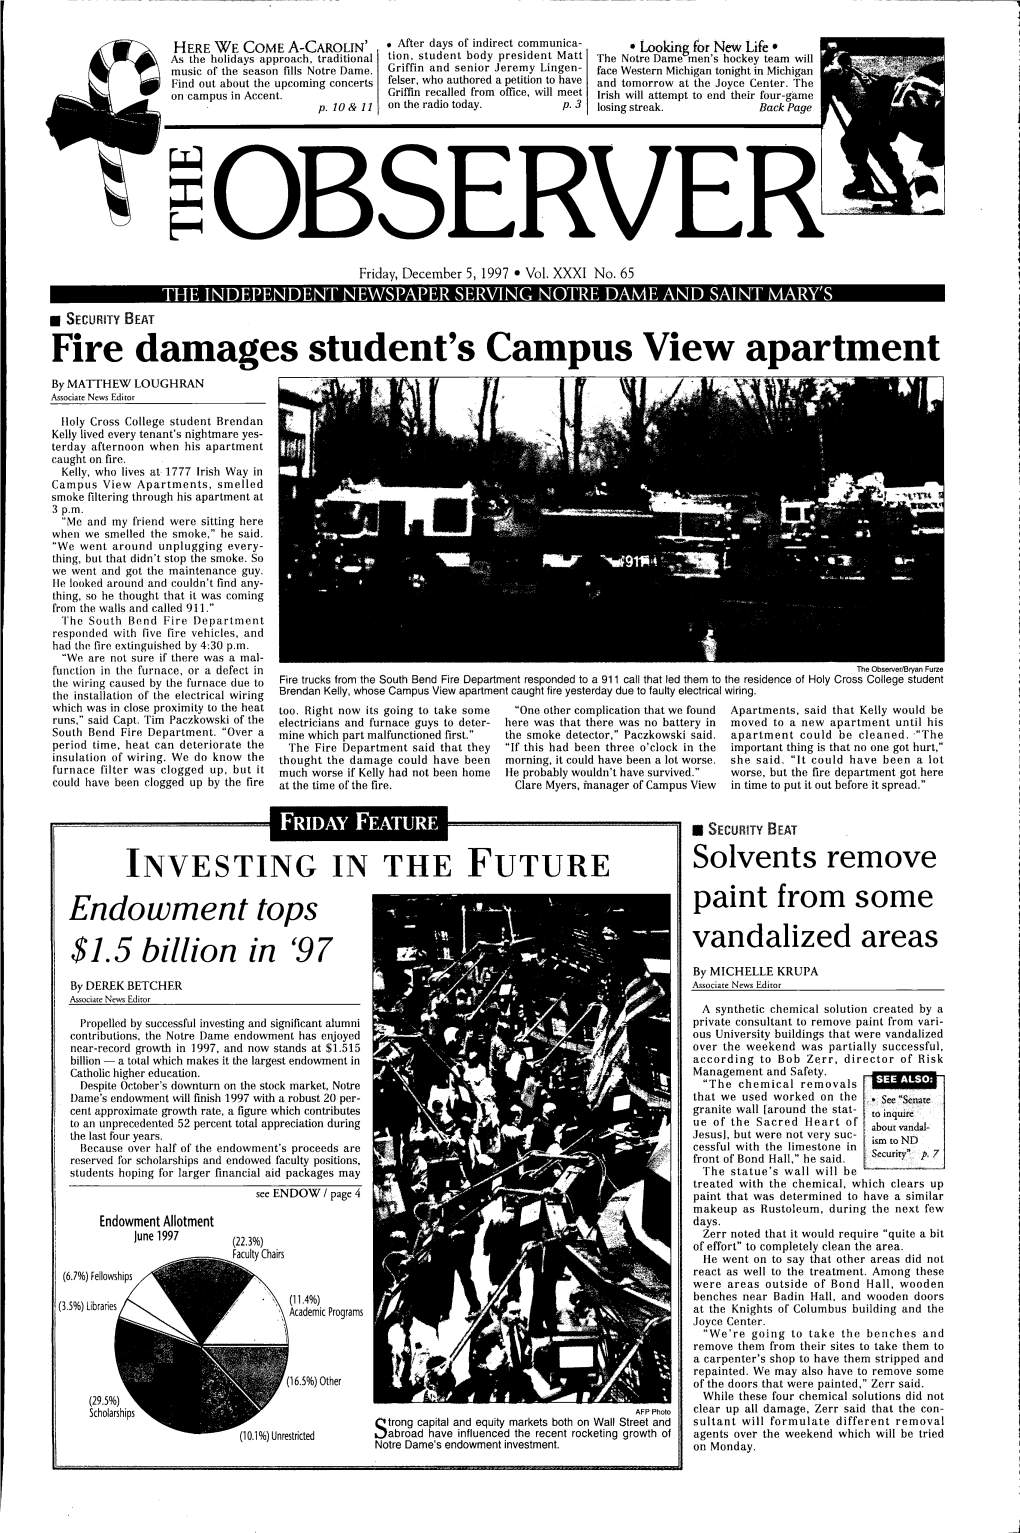 Fire Damages Student's Campus View Apartment by MATTHEW LOUGHRAN Associate News Editor